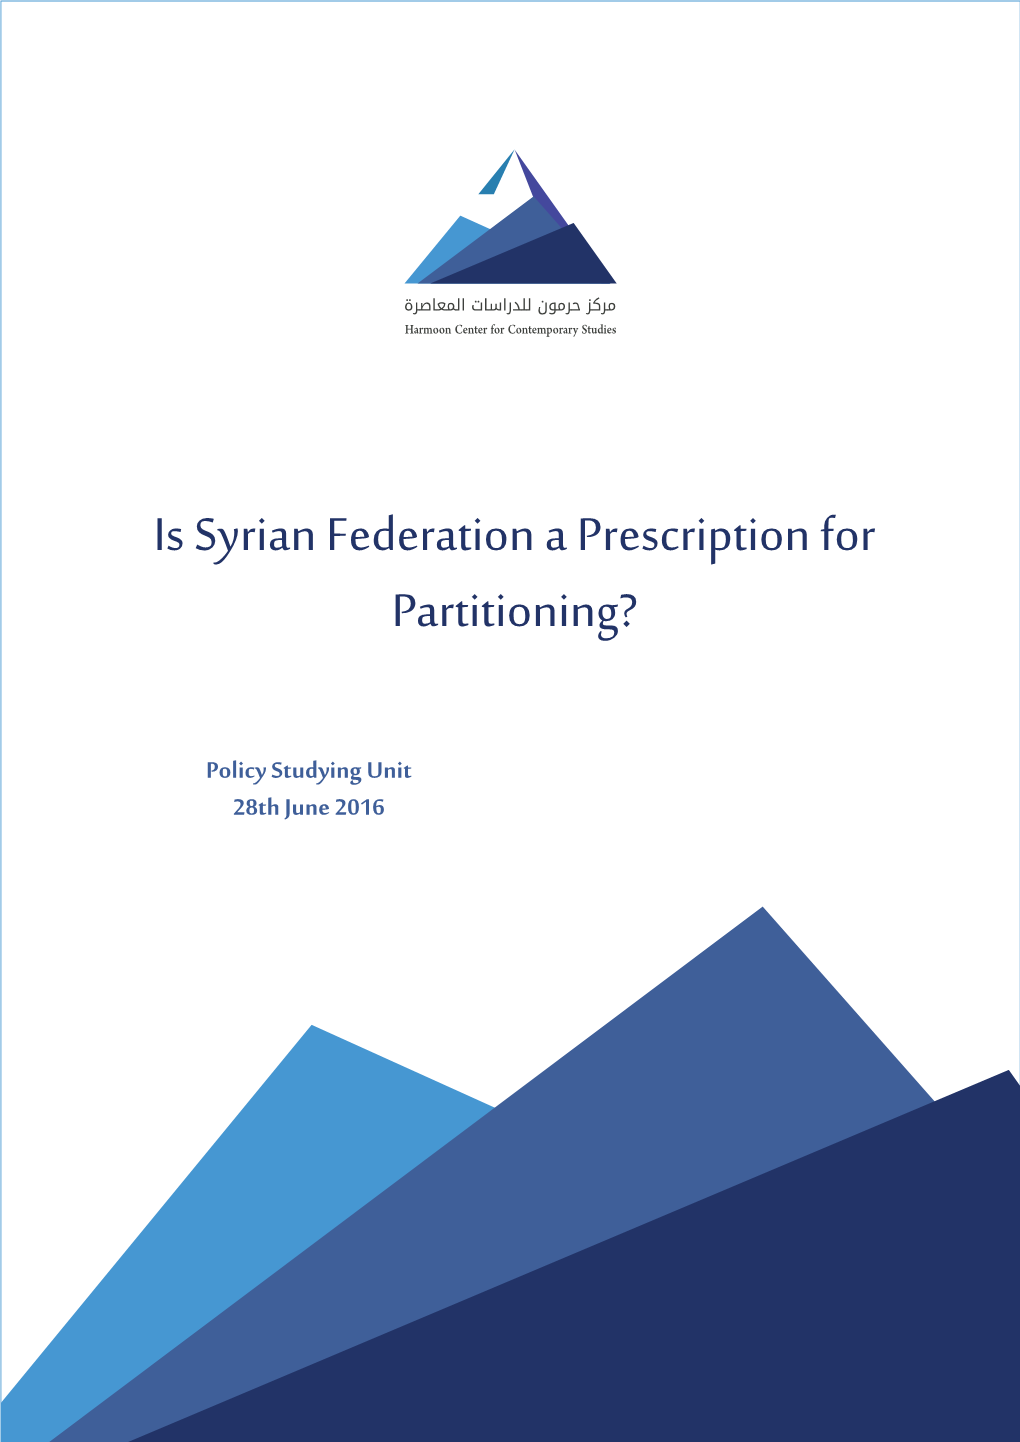 Is Syrian Federation a Prescription for Partitioning?